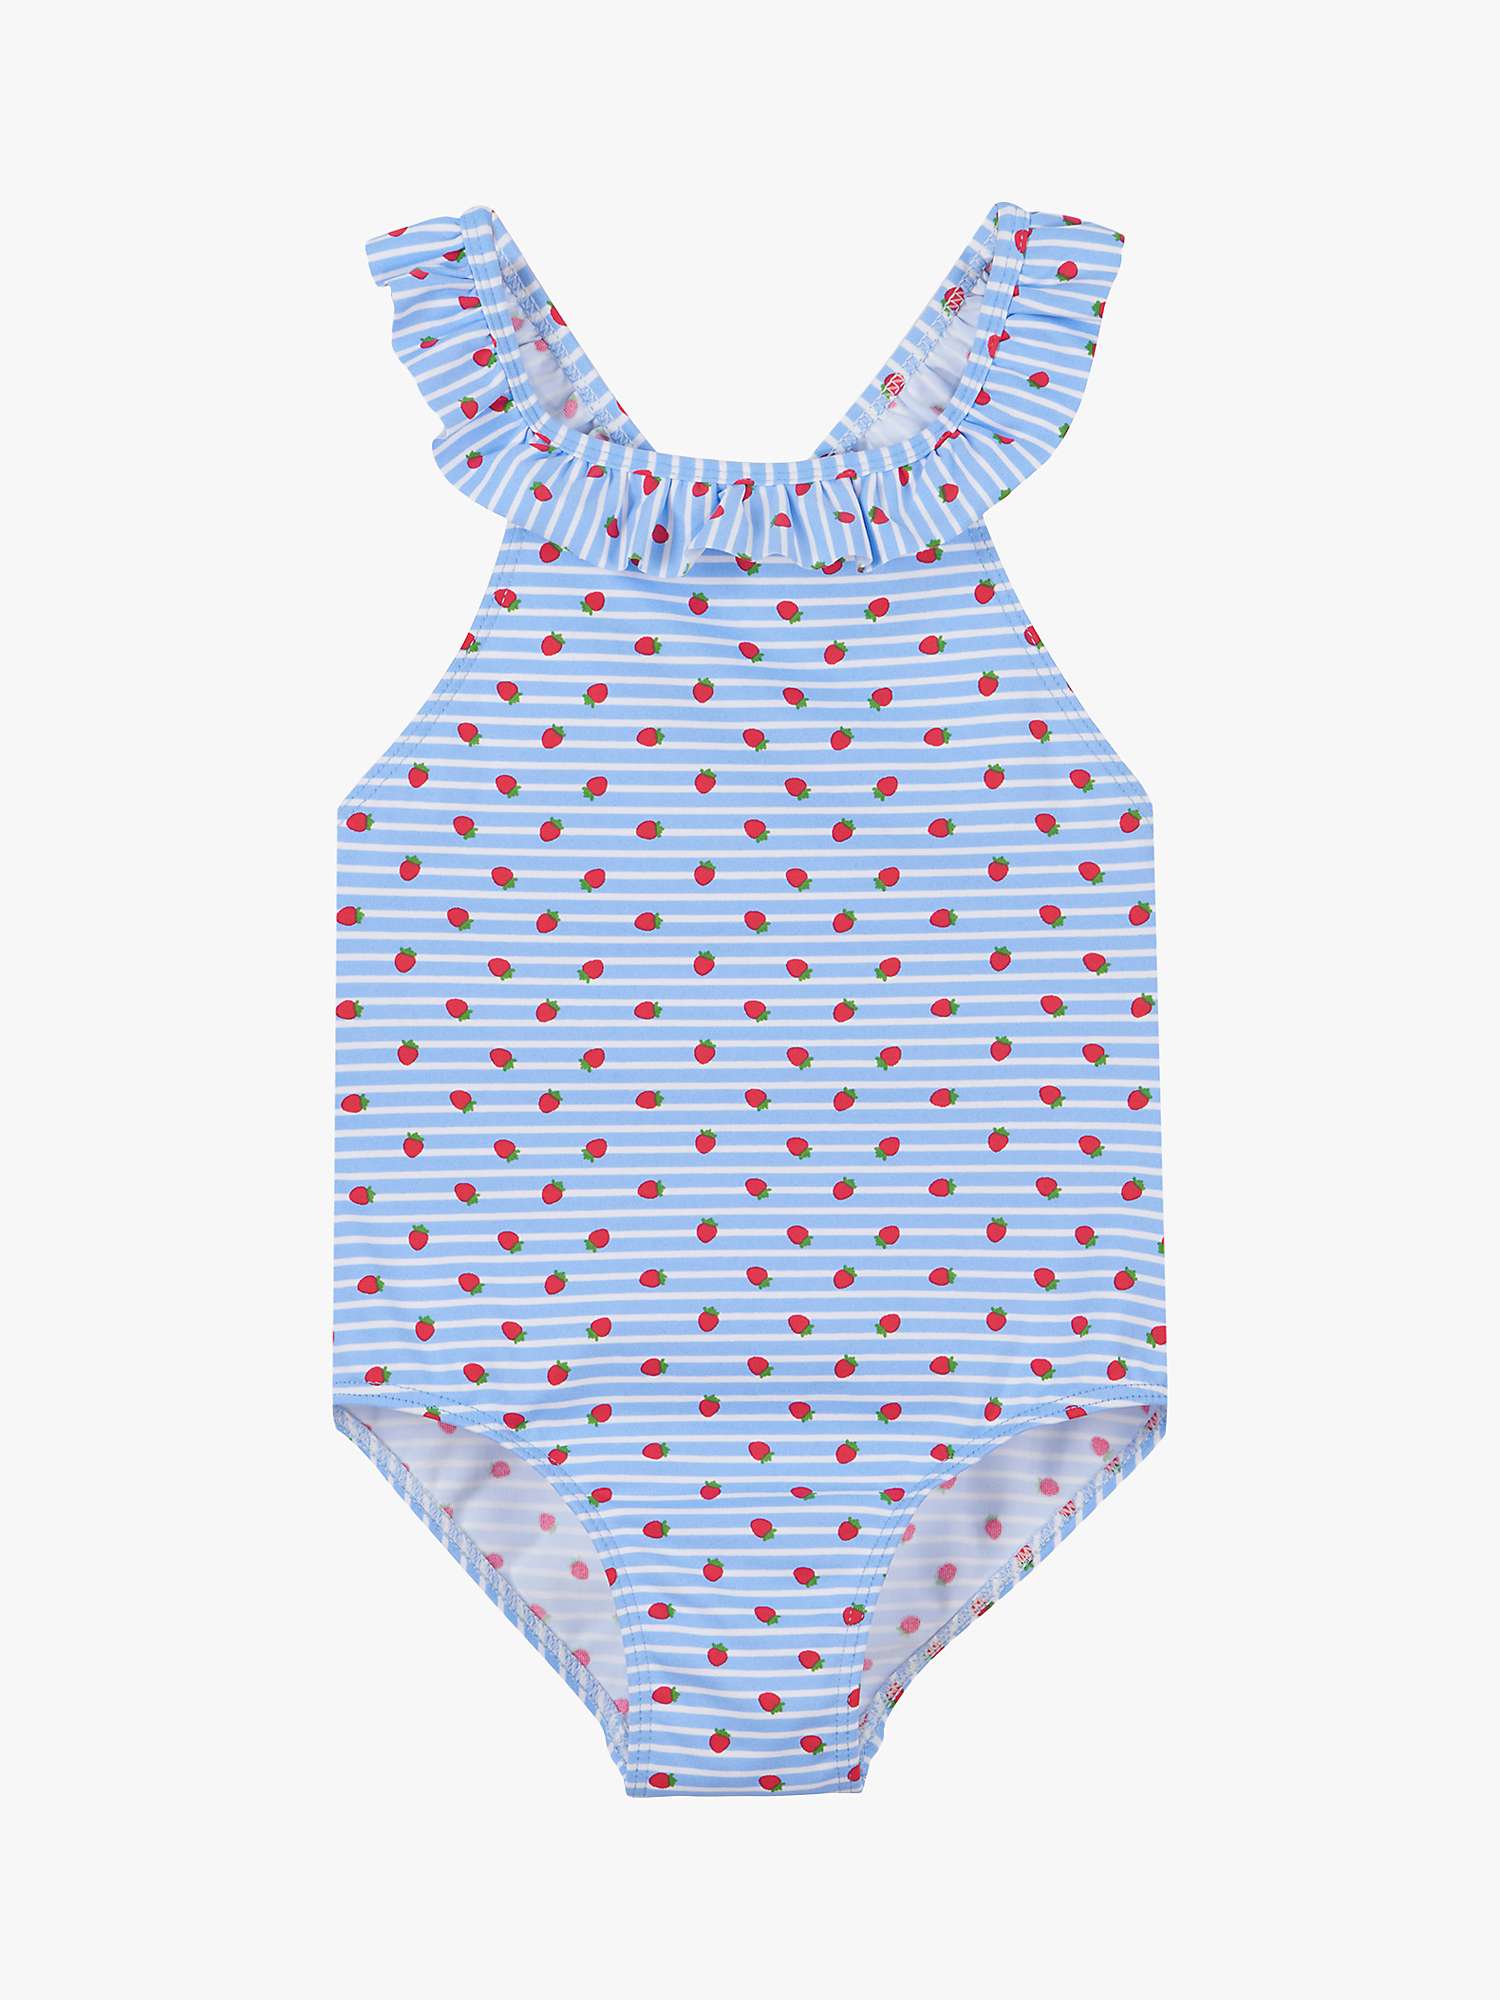 Buy Trotters Baby Strawberry Peplum Swimsuit, Blue S/Strawberry Online at johnlewis.com